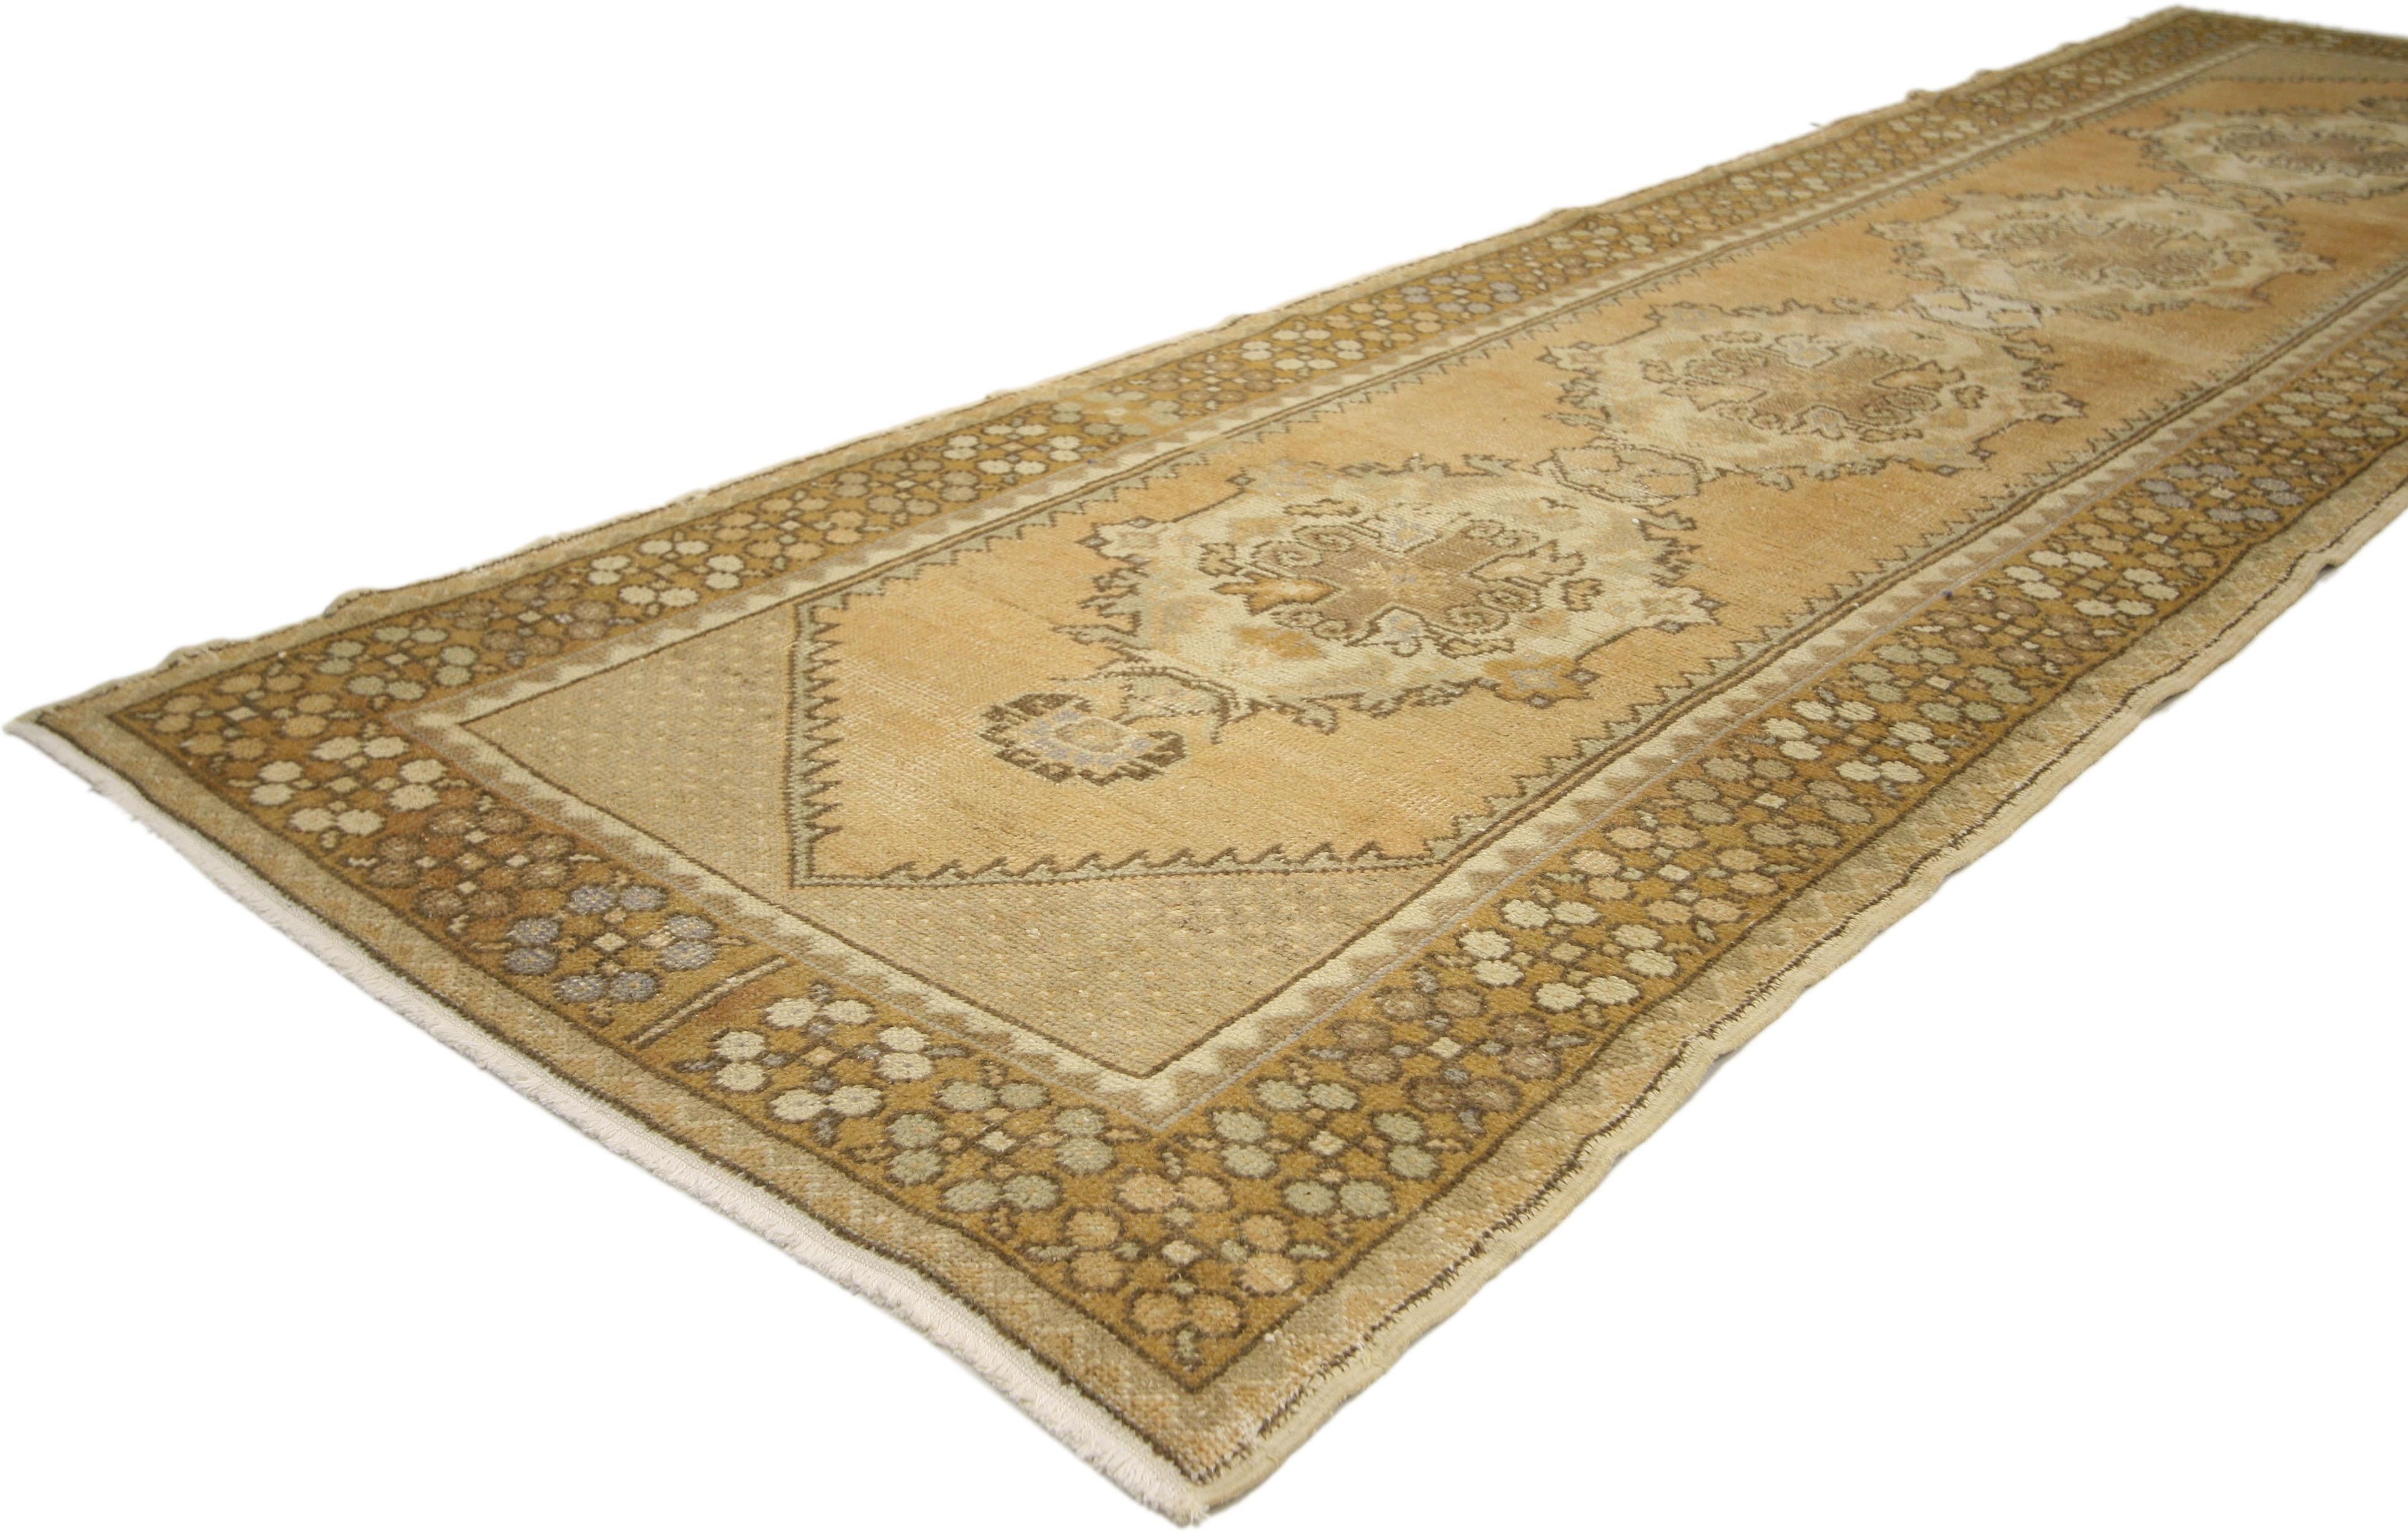 50230, a vintage Turkish Oushak rug runner. This vintage Turkish Oushak runner in warm colors features four intricate connected floral medallions, each with a cruciform with a gul to the center in neutral shades of the desert terrier; sable, sand,